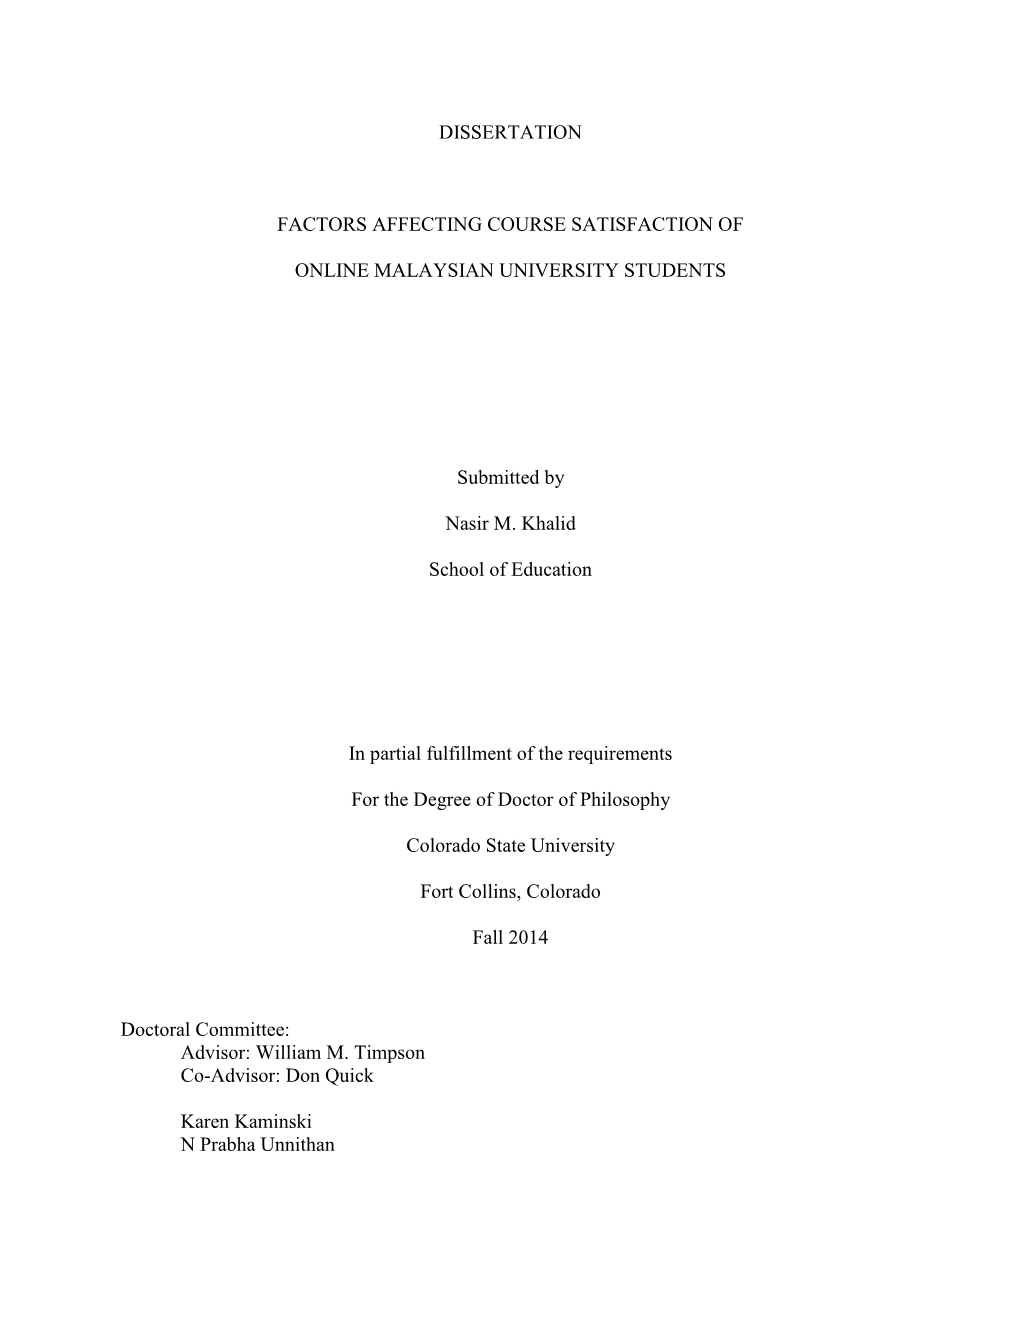 DISSERTATION FACTORS AFFECTING COURSE SATISFACTION of ONLINE MALAYSIAN UNIVERSITY STUDENTS Submitted by Nasir M. Khalid Schoo